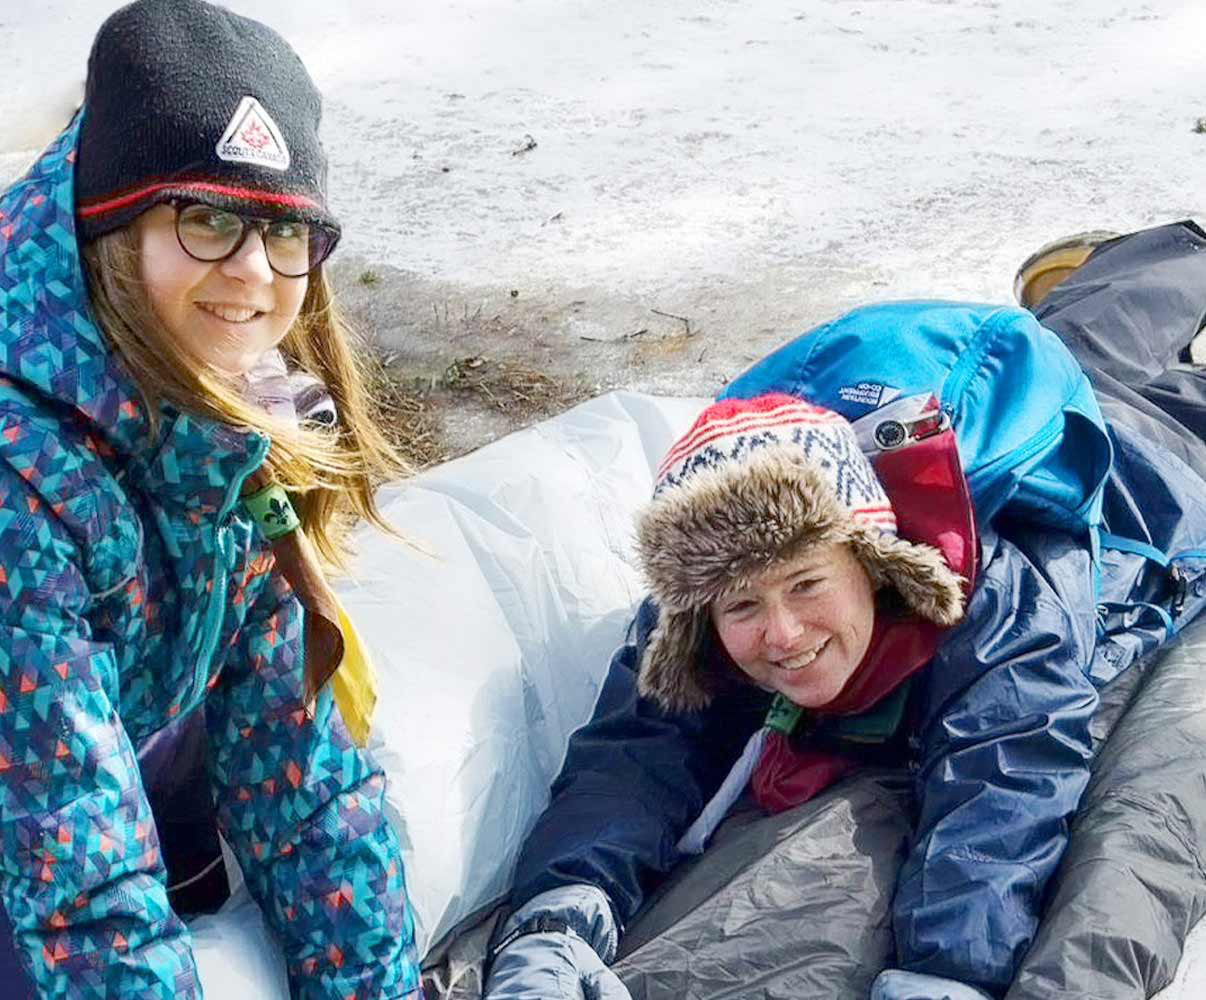 Two young girl Scouts prepare their sleeping bags for winter camping.